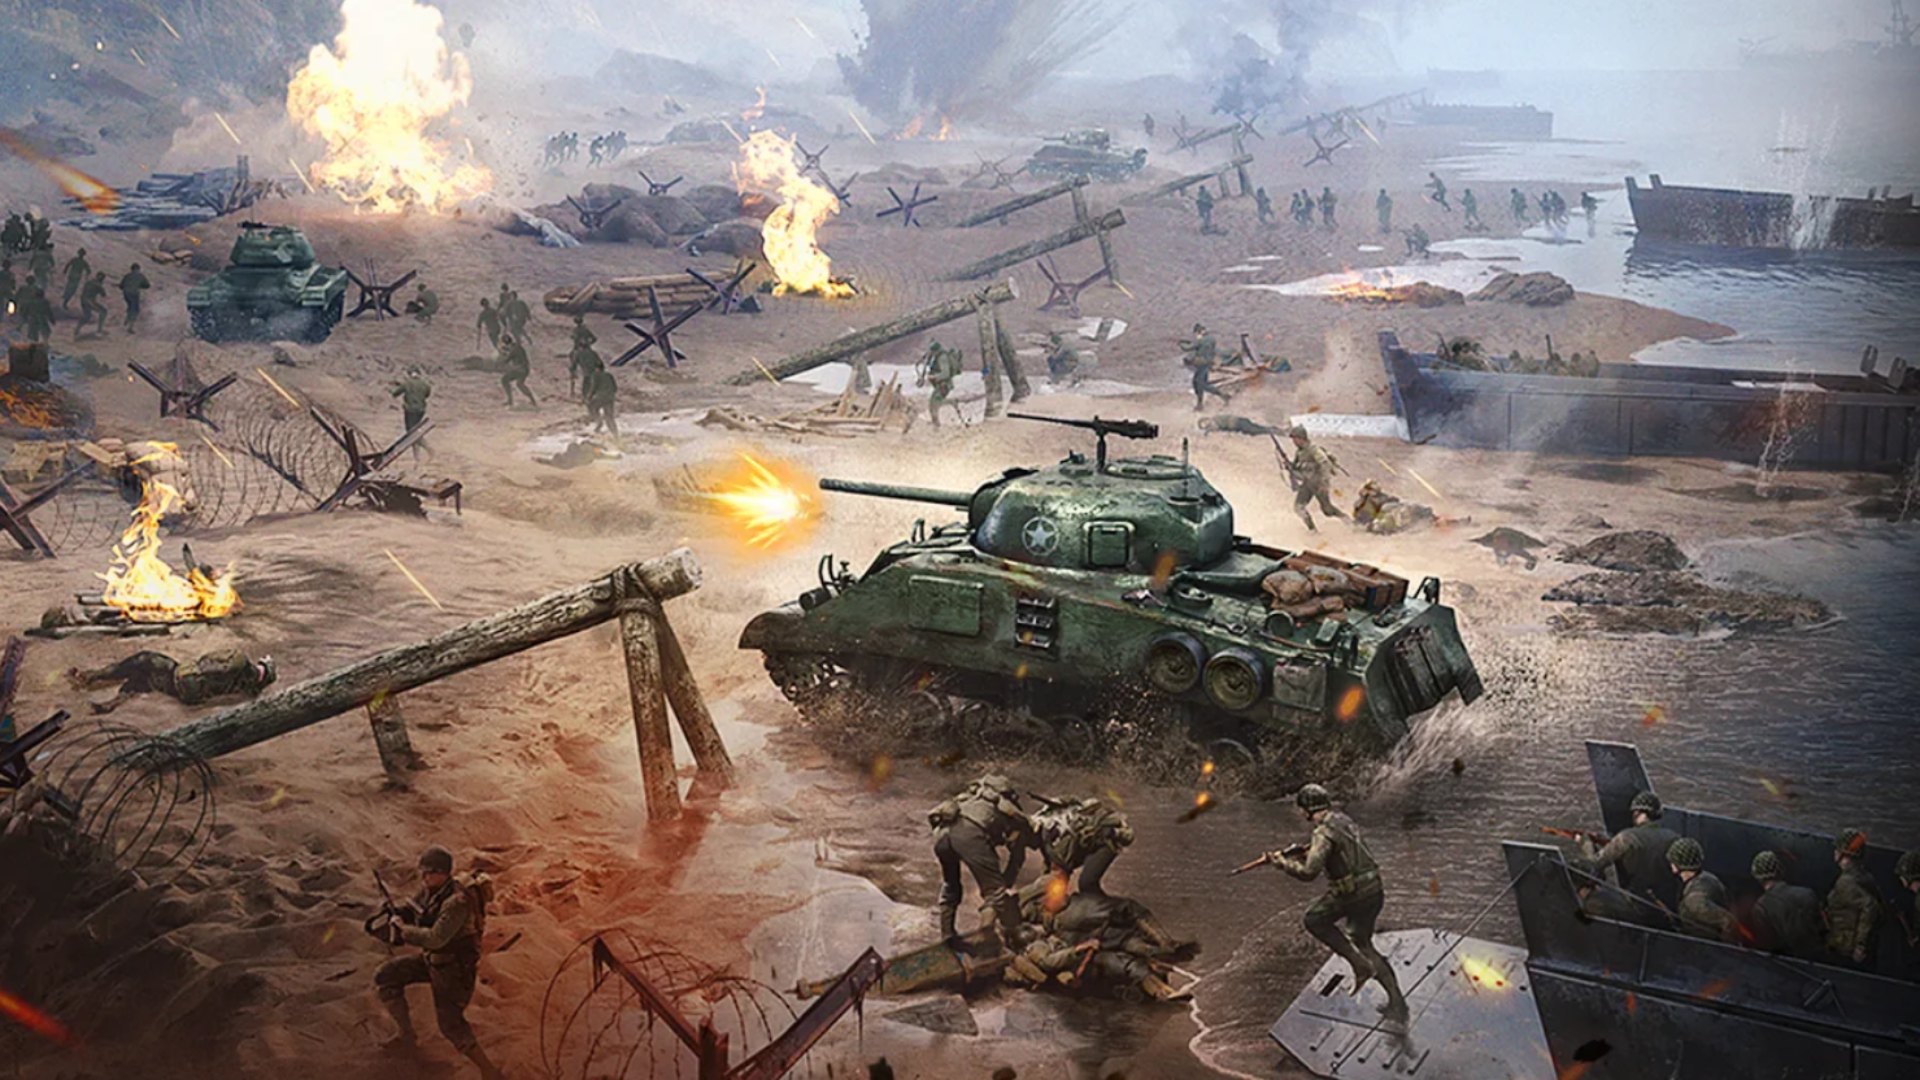 Best mobile war games: Warpath. Image shows a battlefield littered with tanks and soldiers.